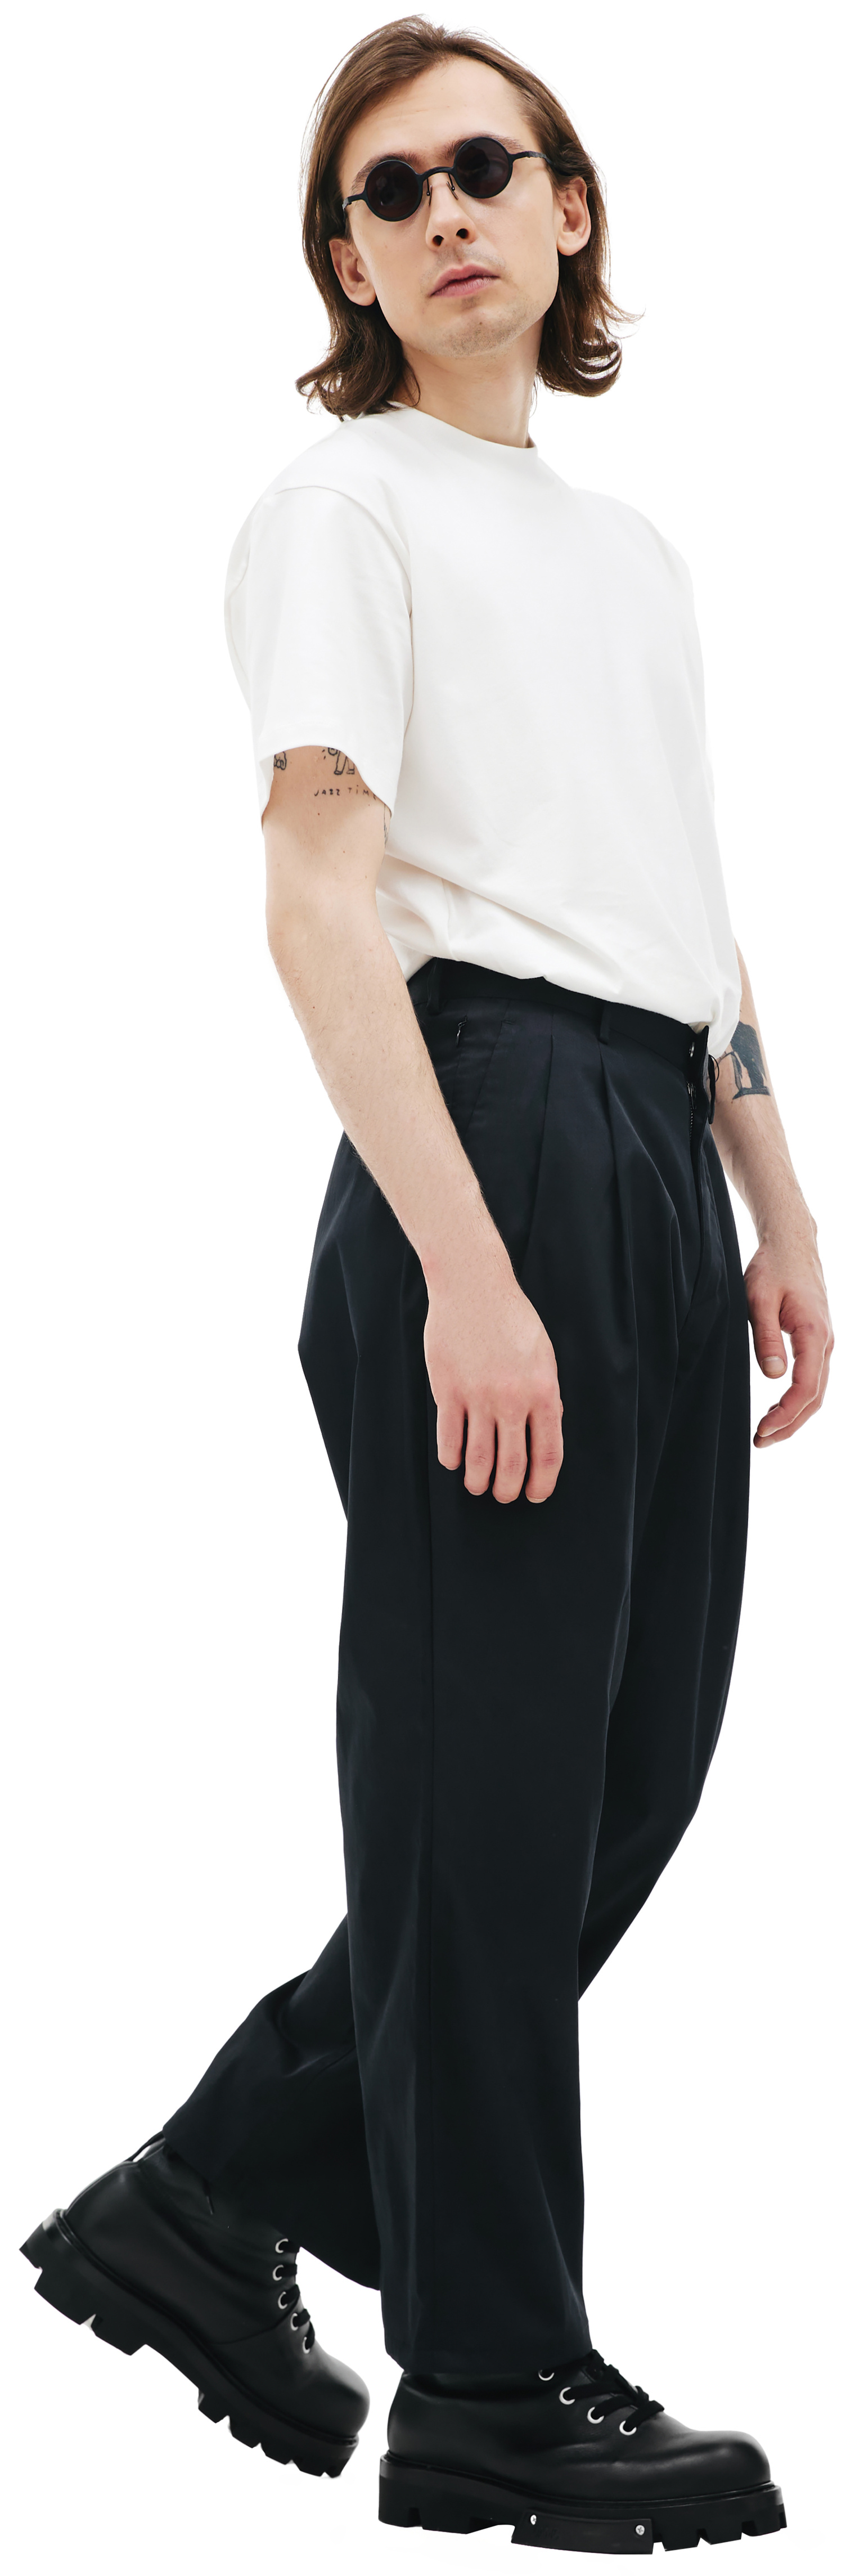 KIMMY Black straight trousers